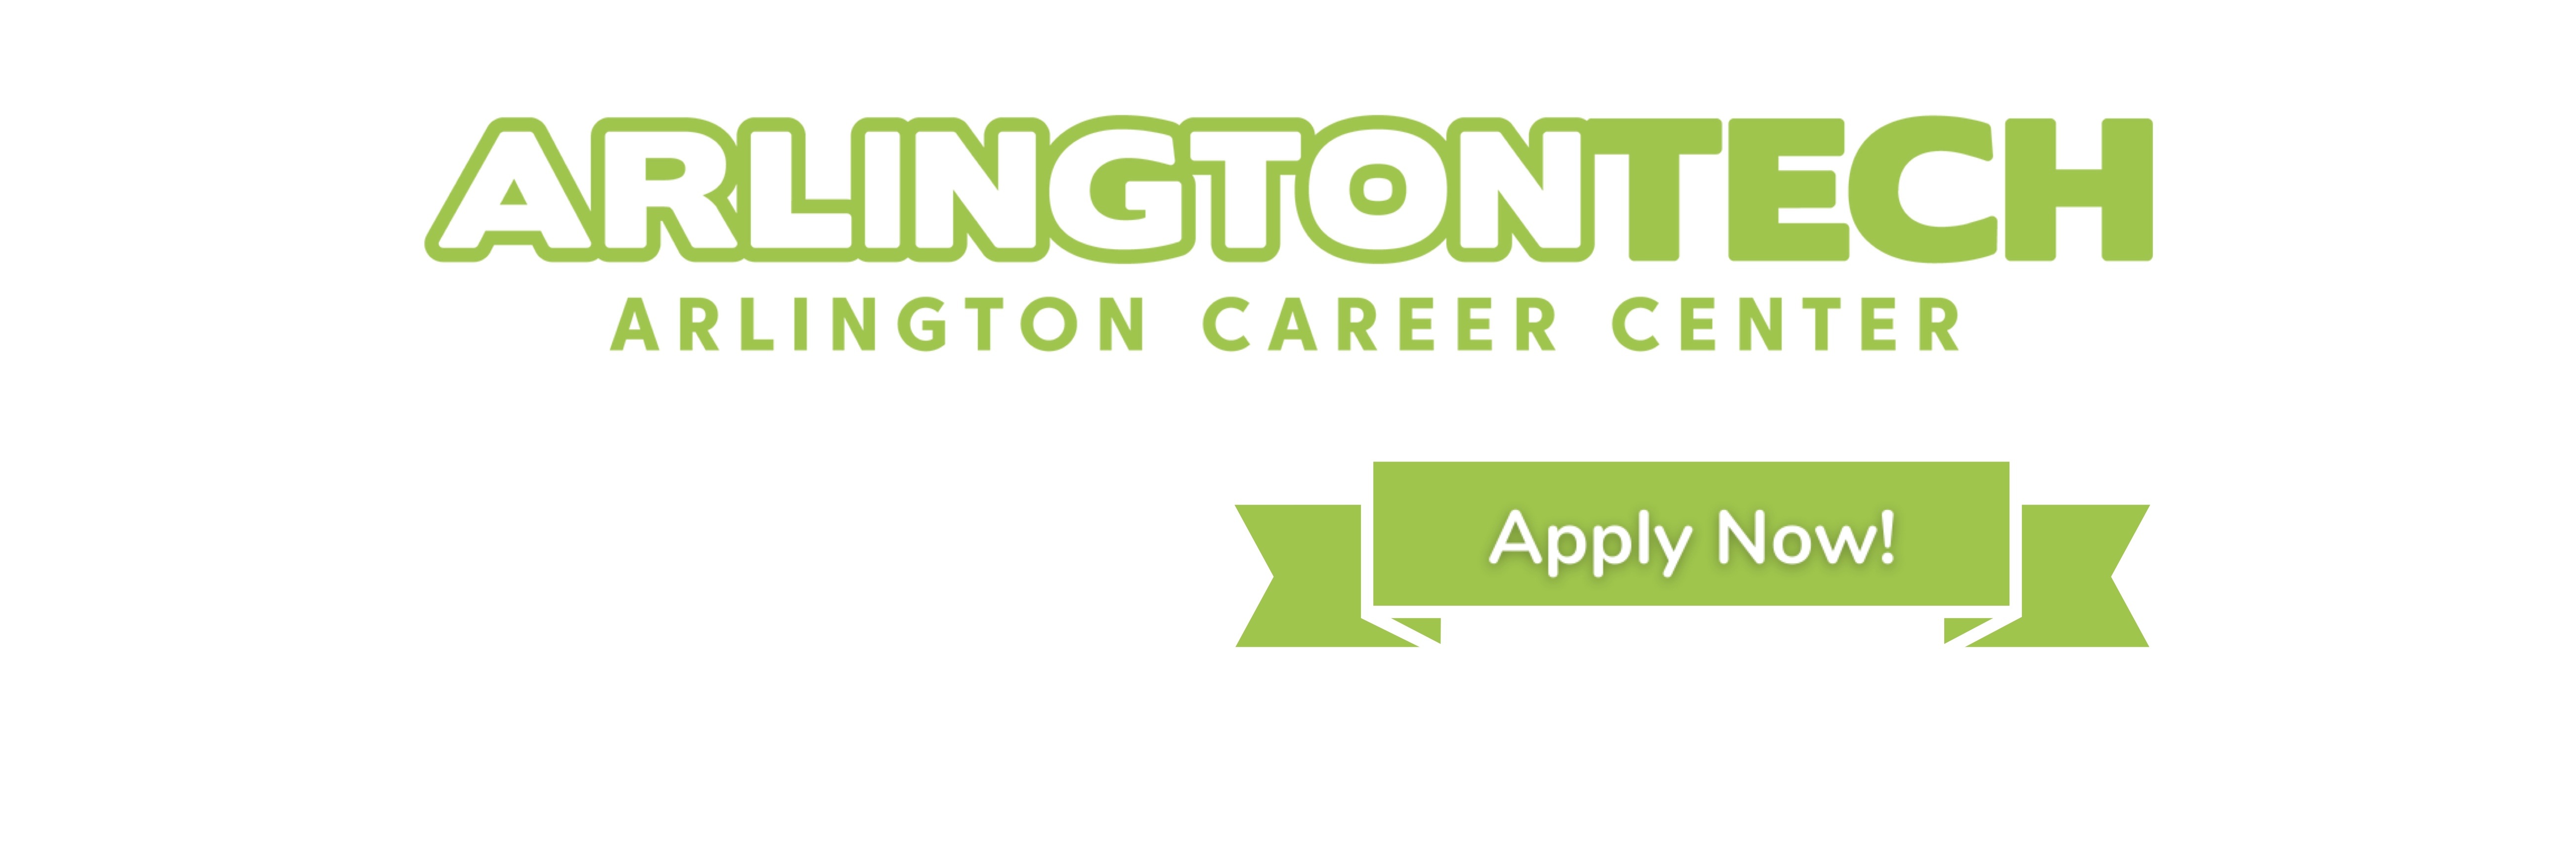 Green and white Arlington Tech logo with message, "Apply Now!"